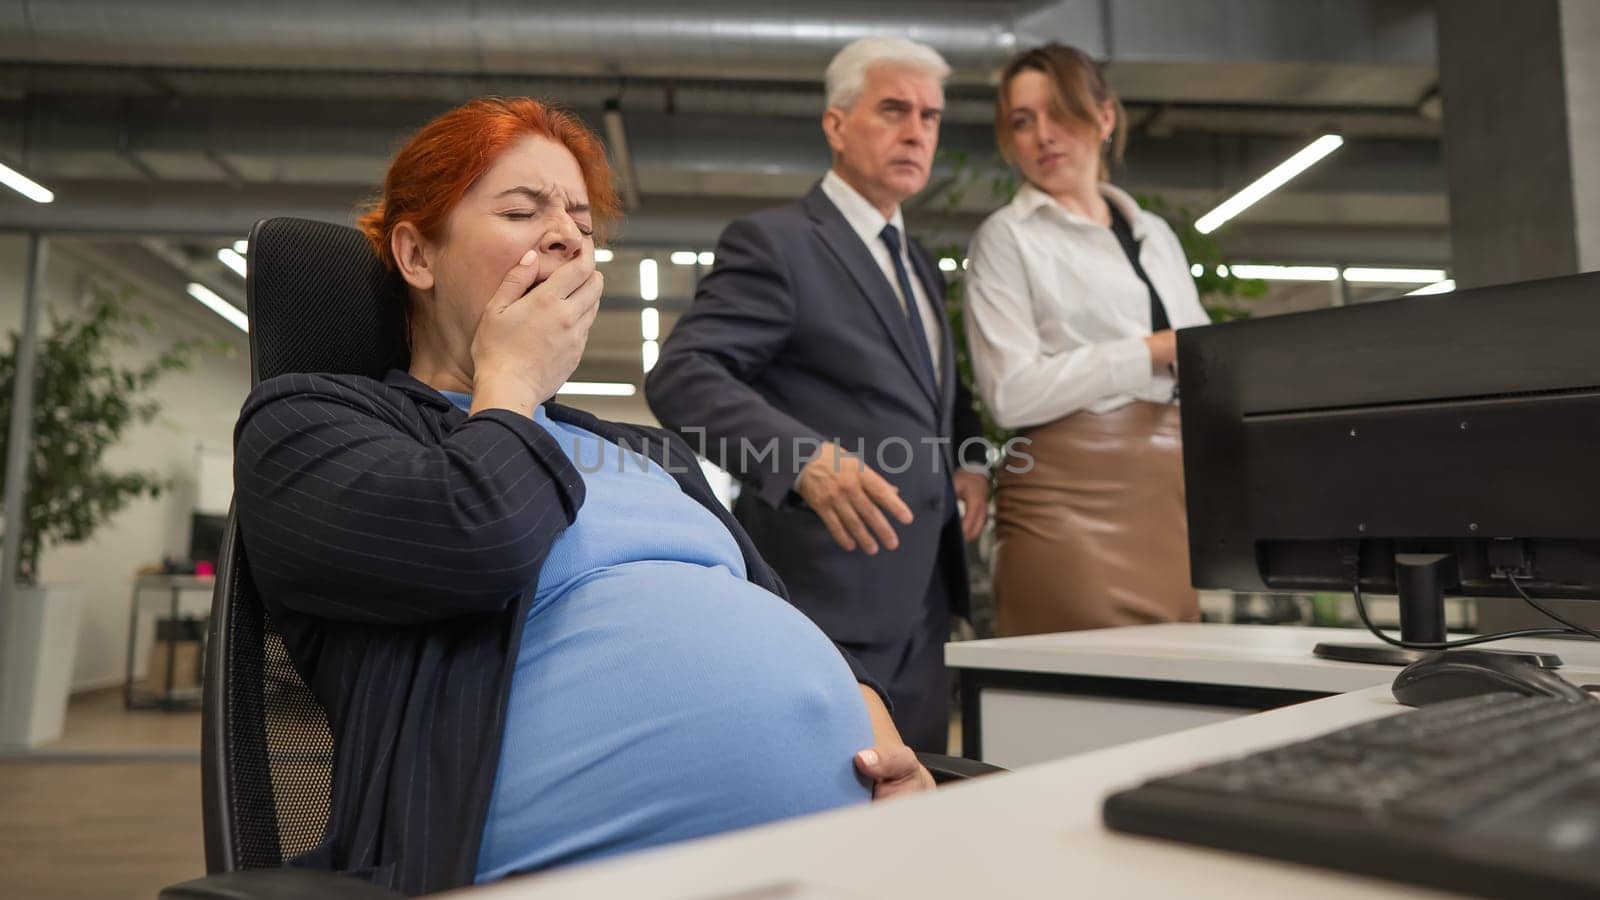 Pregnant woman yawns at work. Colleagues look disapprovingly. by mrwed54